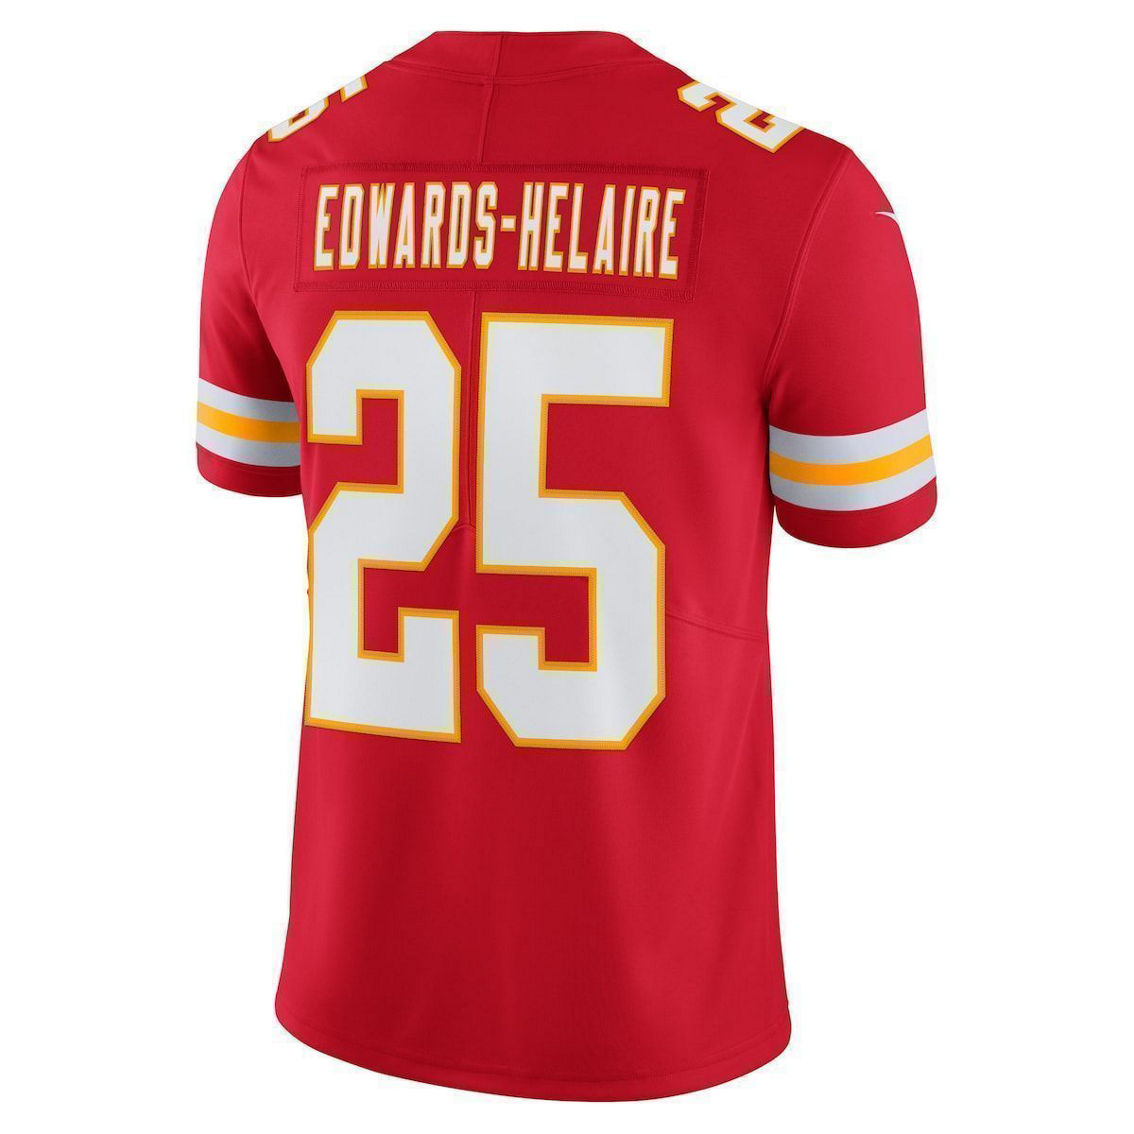 Nike Men's Clyde Edwards-Helaire Red Kansas City Chiefs Vapor Limited Jersey - Image 4 of 4